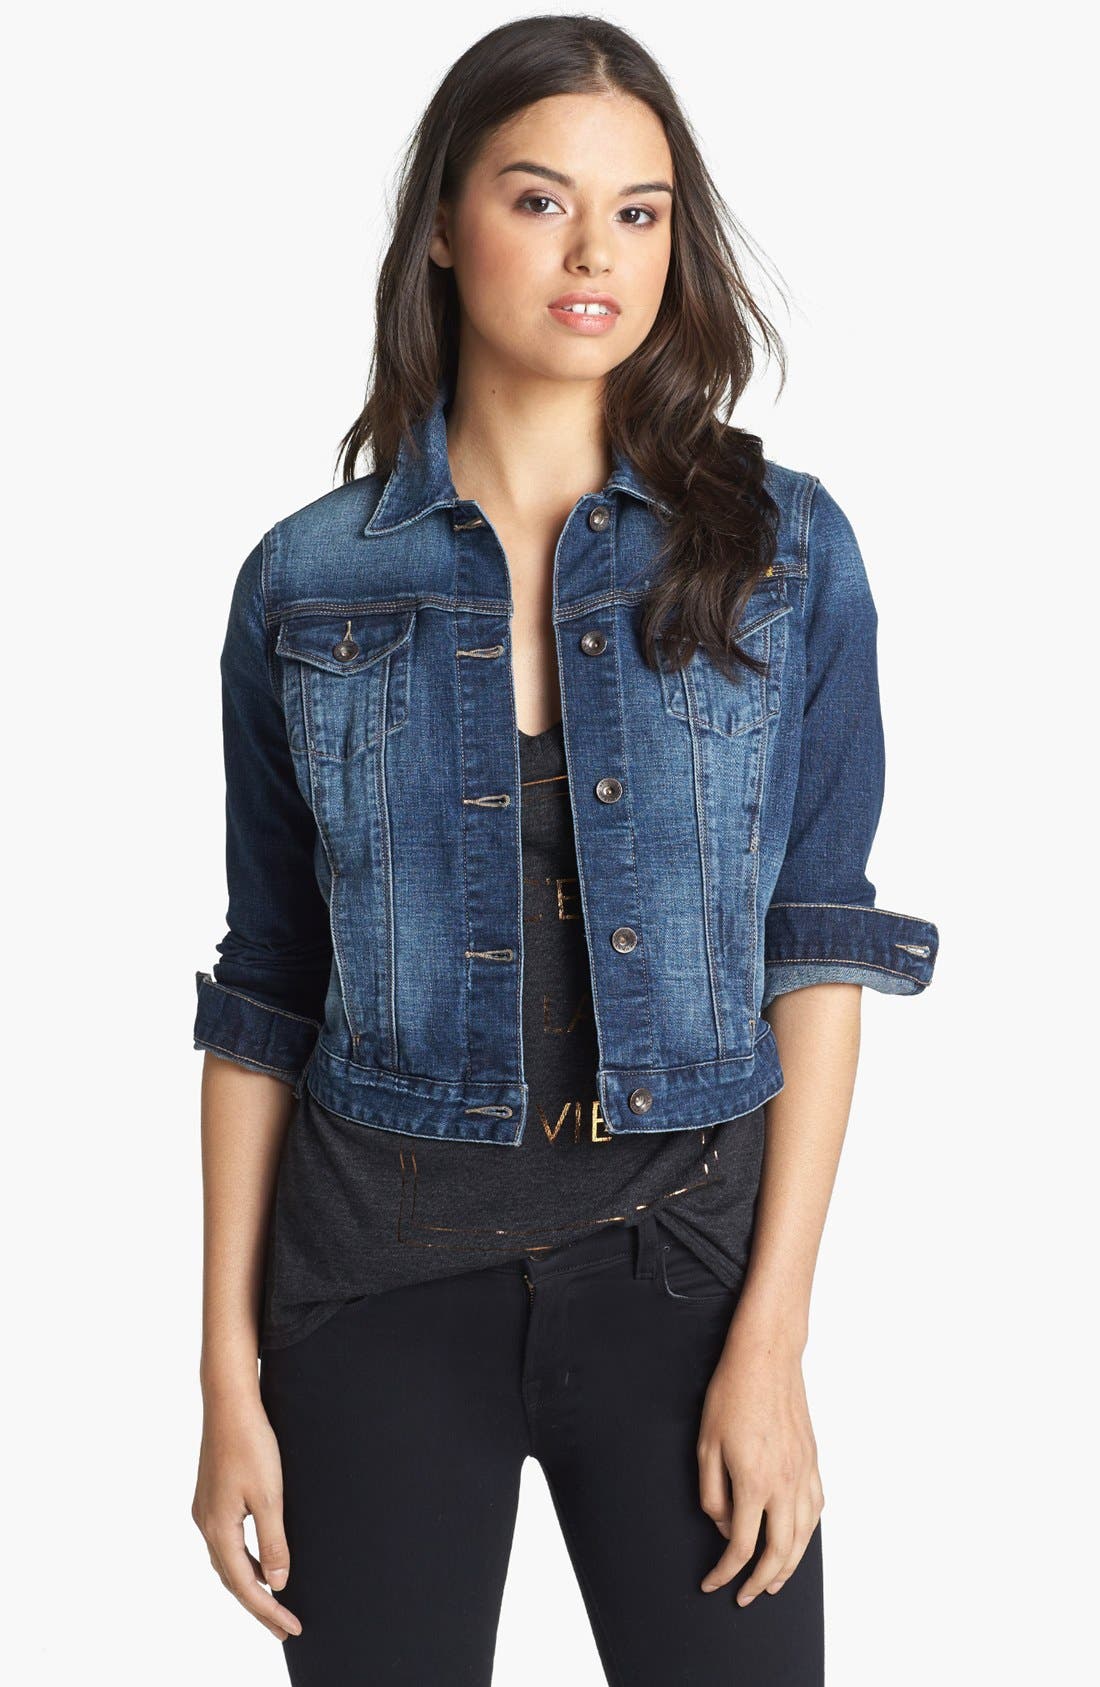 nordstrom lucky brand jeans